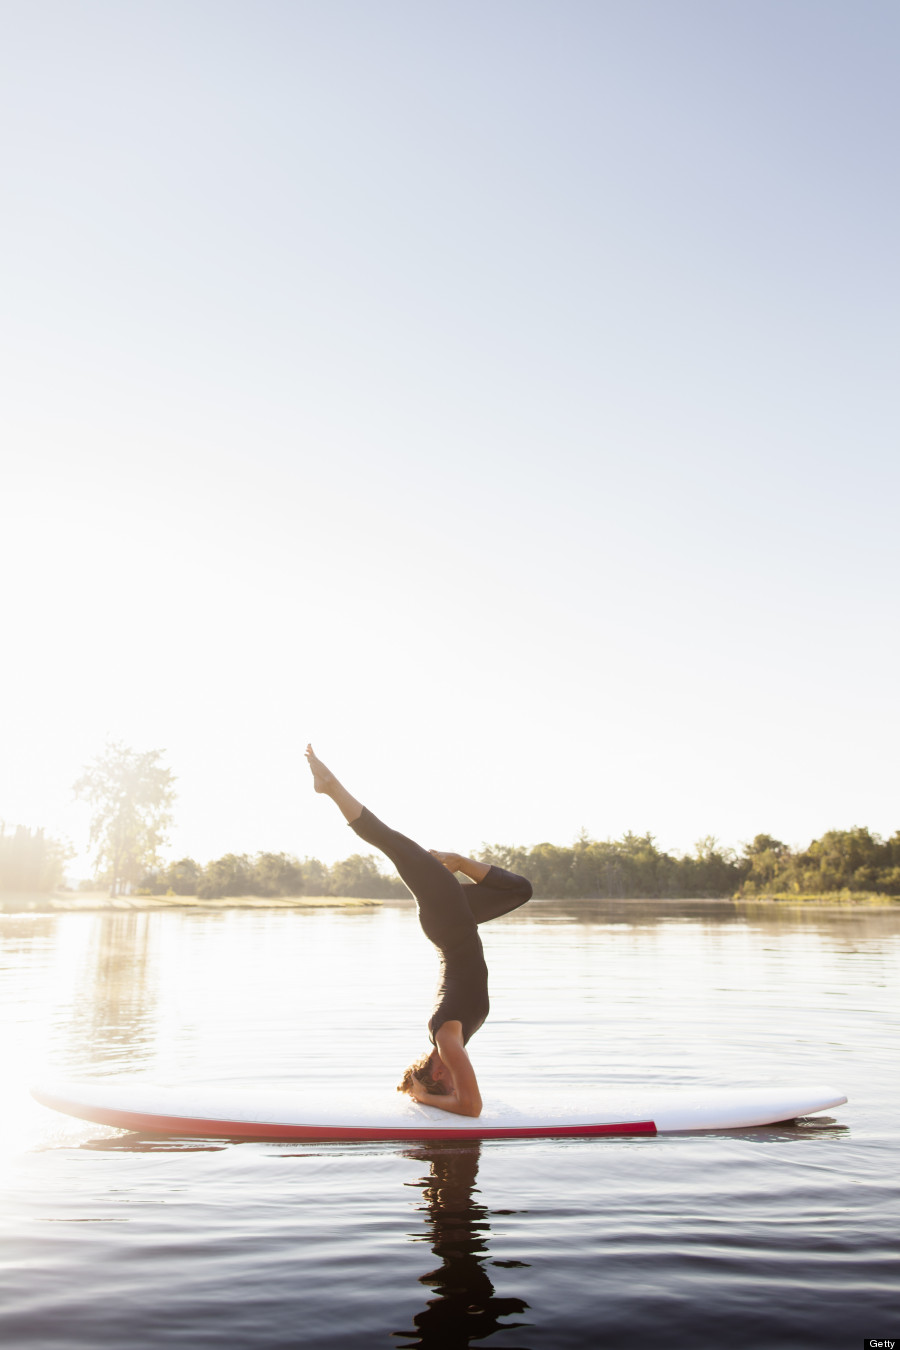 Here's How You Get Fit on the Water With Paddleboard Yoga - YOGA PRACTICE